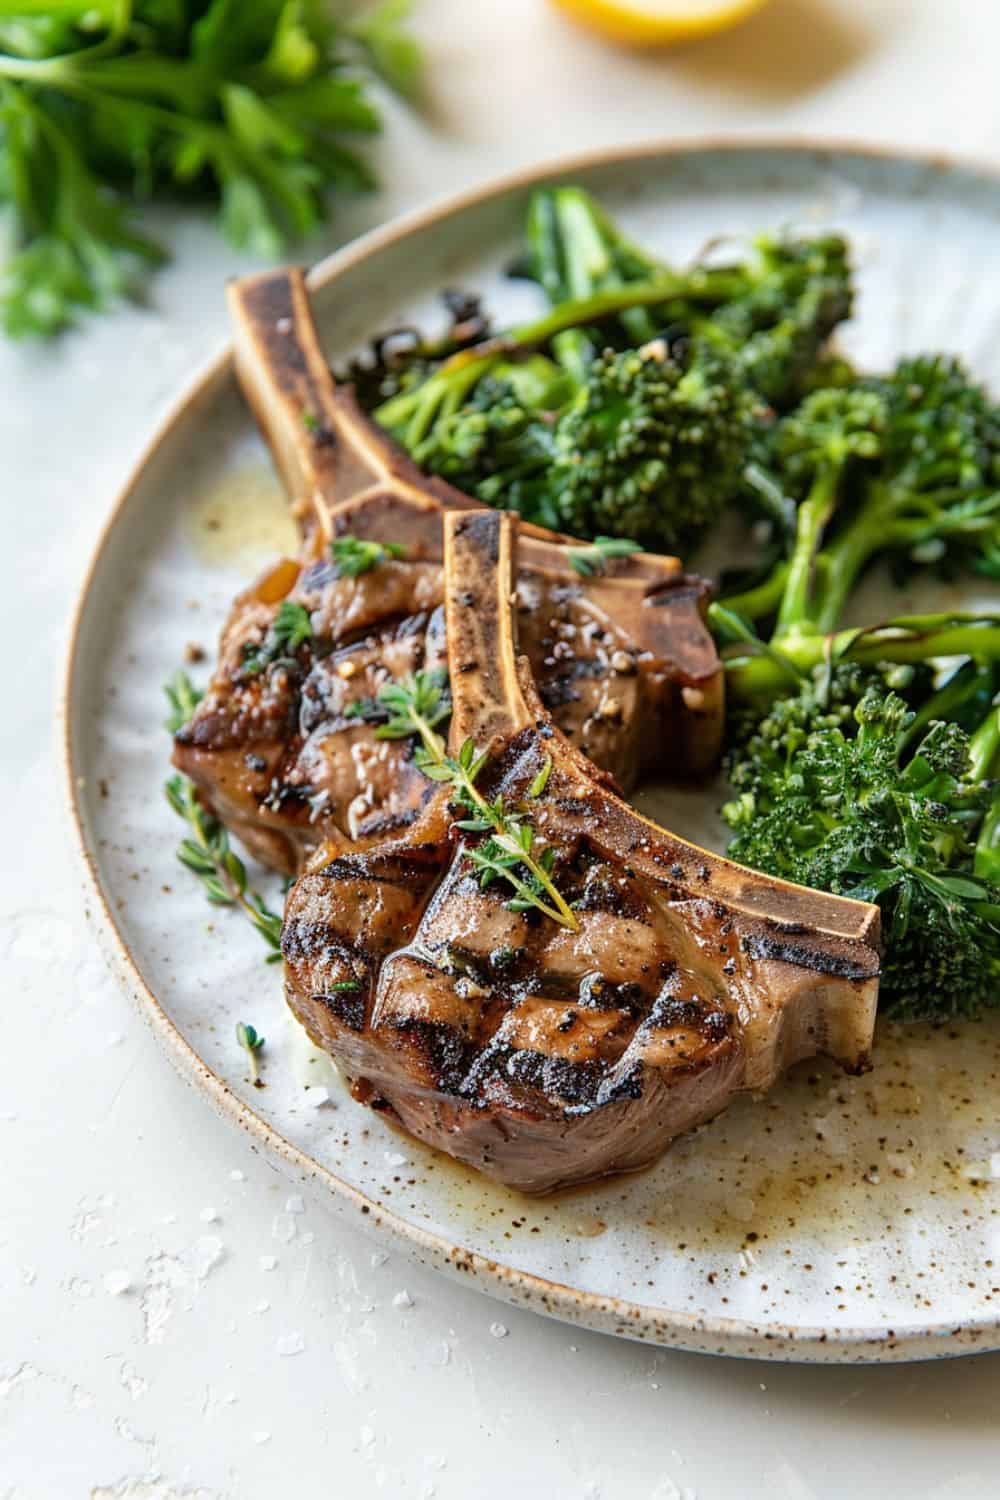 Succulent lamb chops with charred edges alongside vibrant green broccolini, drizzled with olive oil and seasoned with garlic, ready to enjoy.